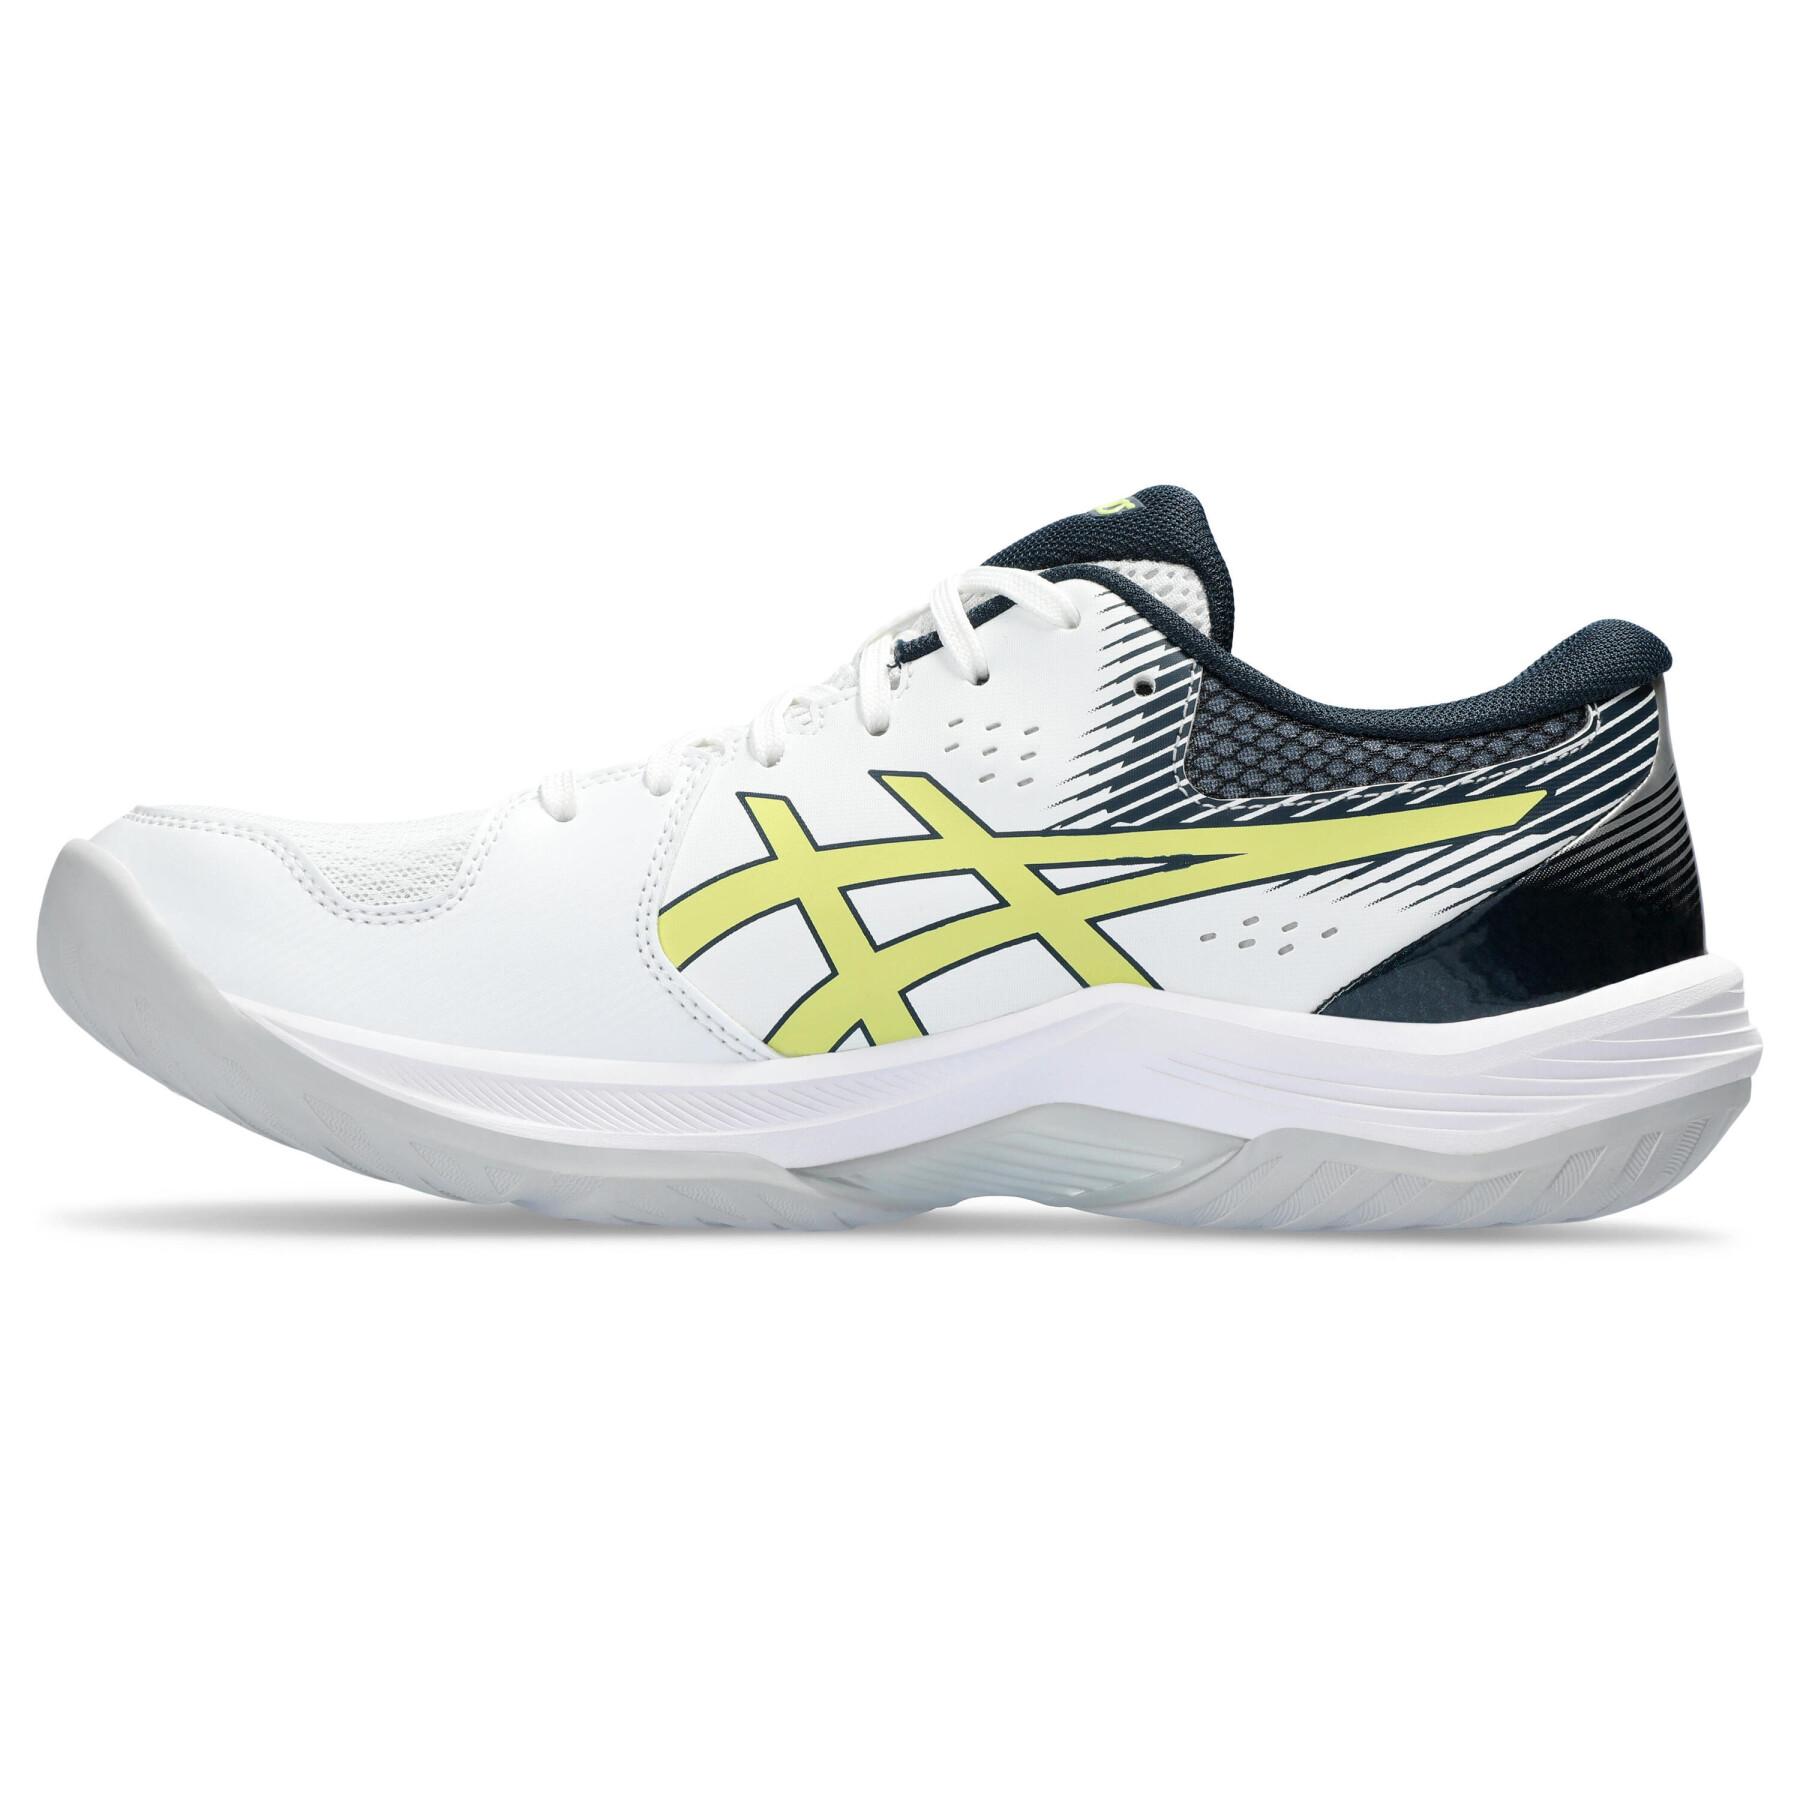 Shoes indoor Asics Beyond FF